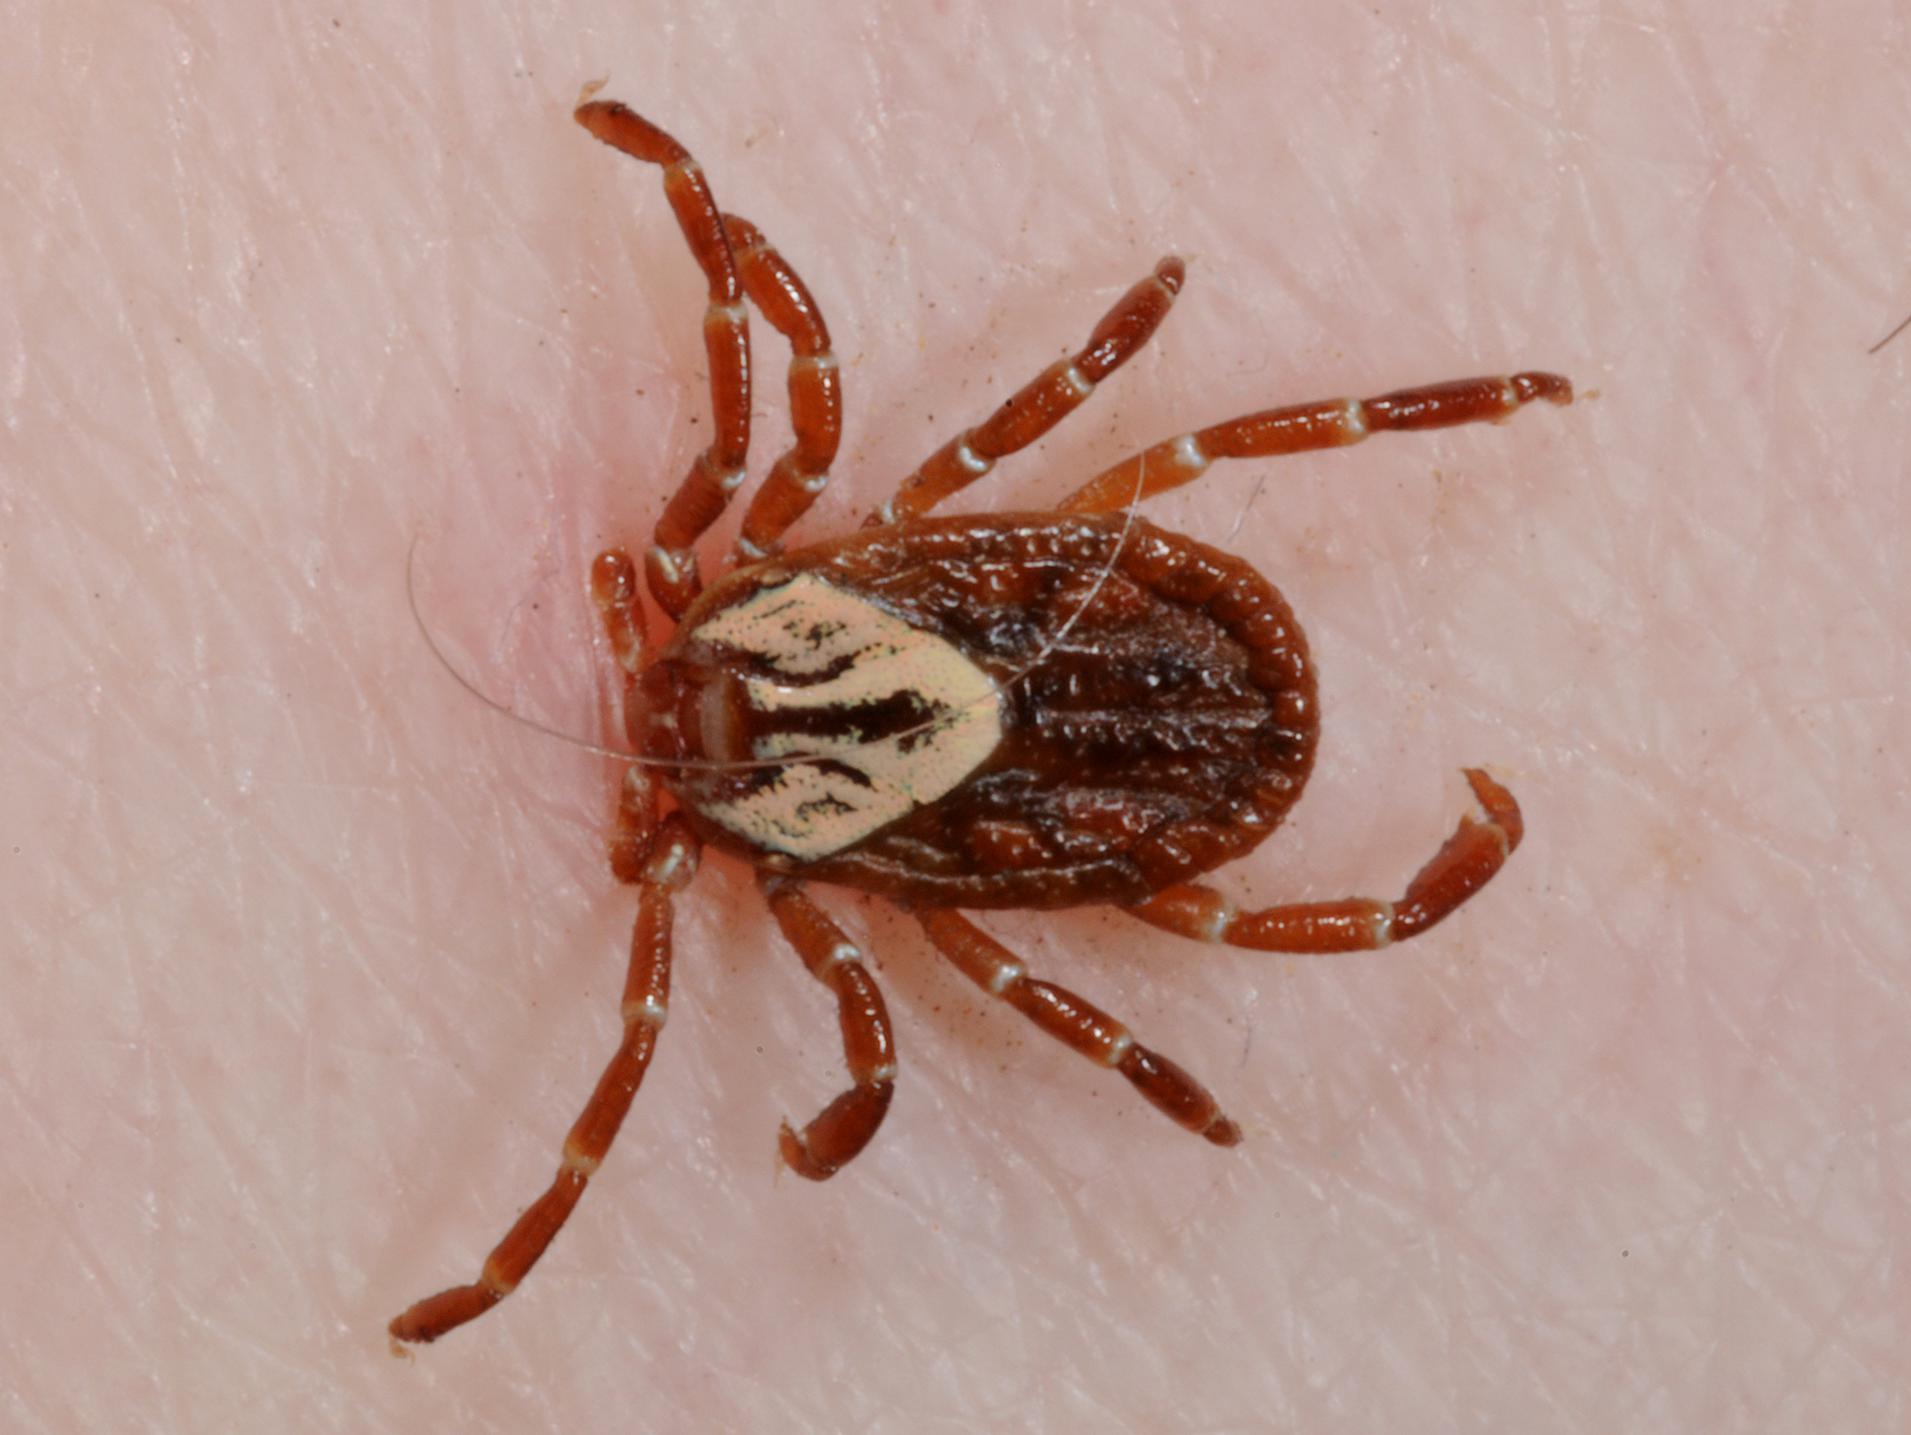 Close-up of a tick attached to human skin.